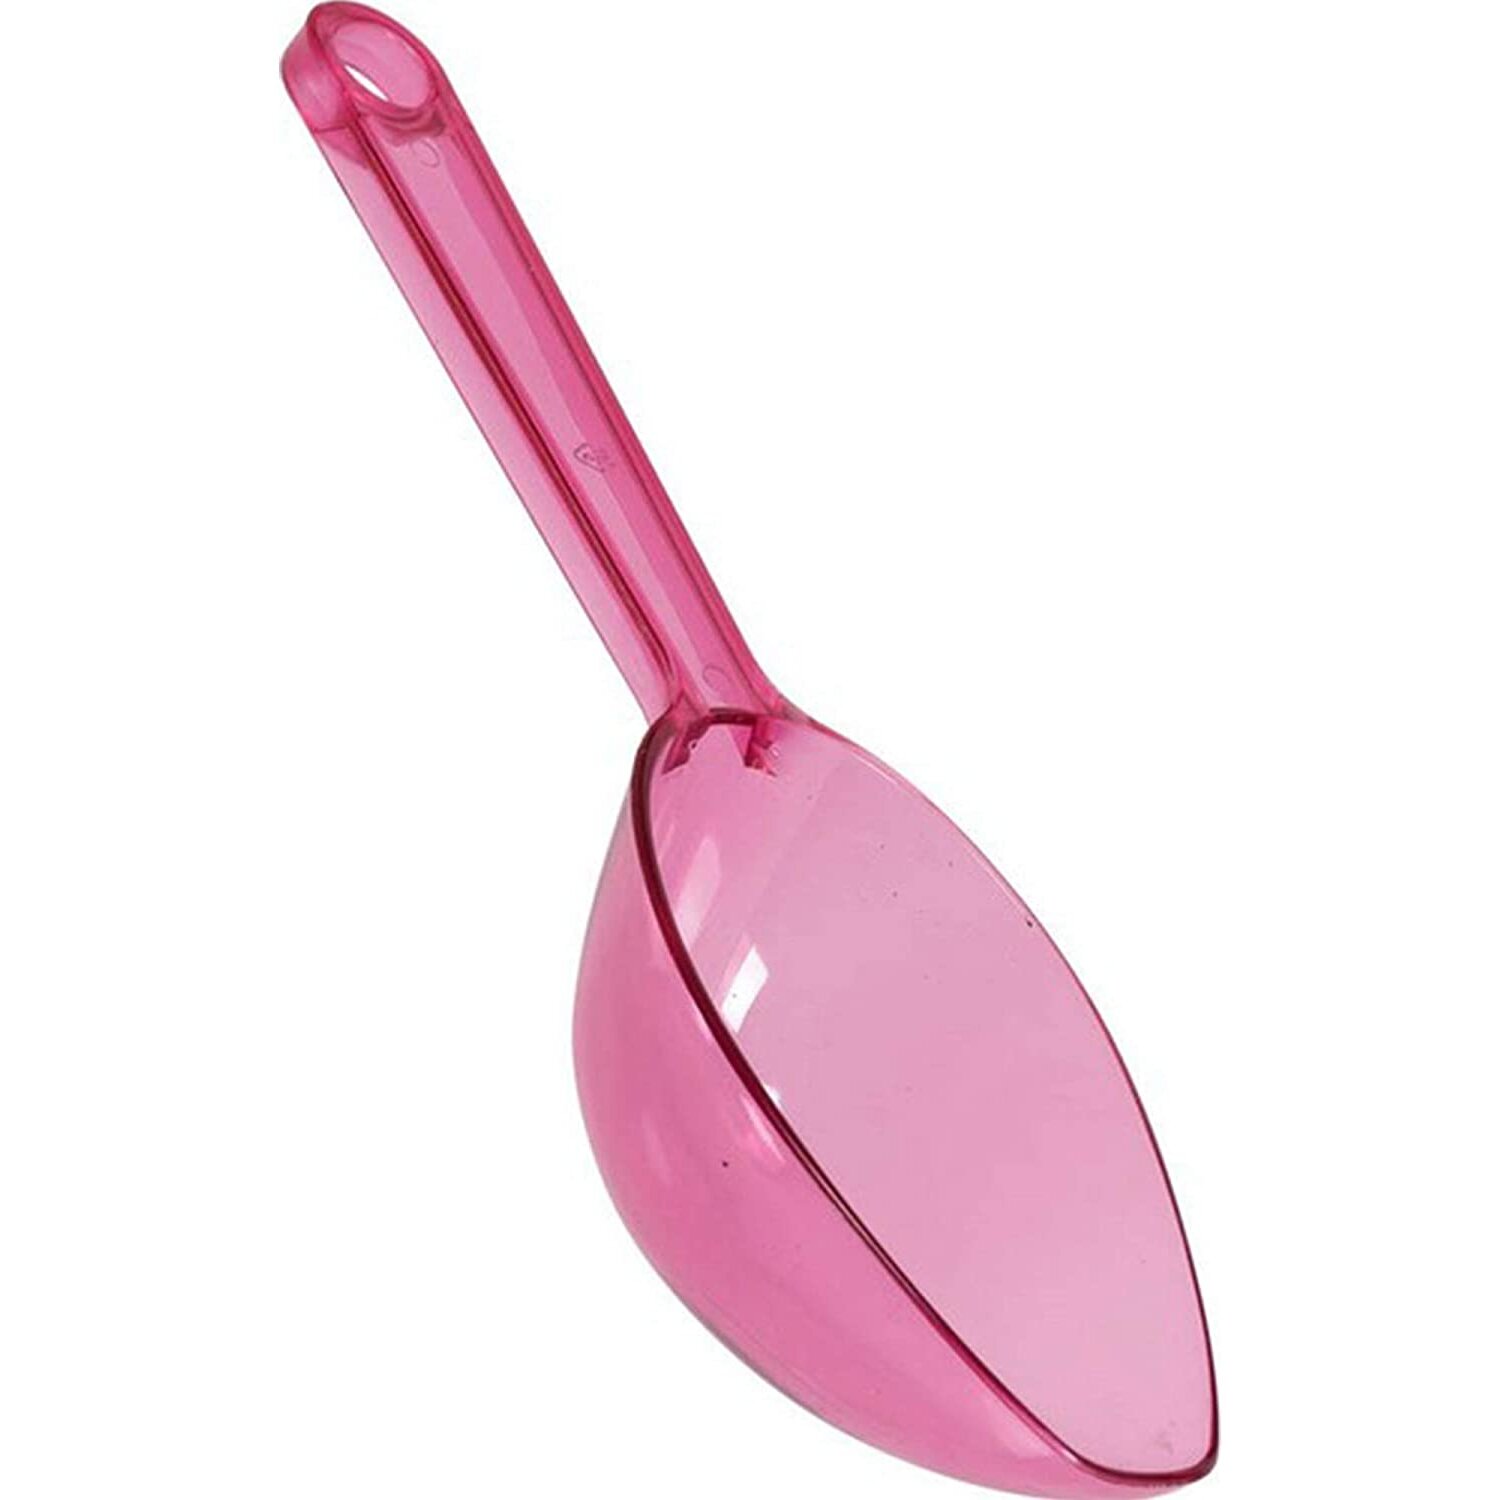 amscan 437844-103 Bright Pink Plastic Candy Scoop 16.5cm-1 Pc